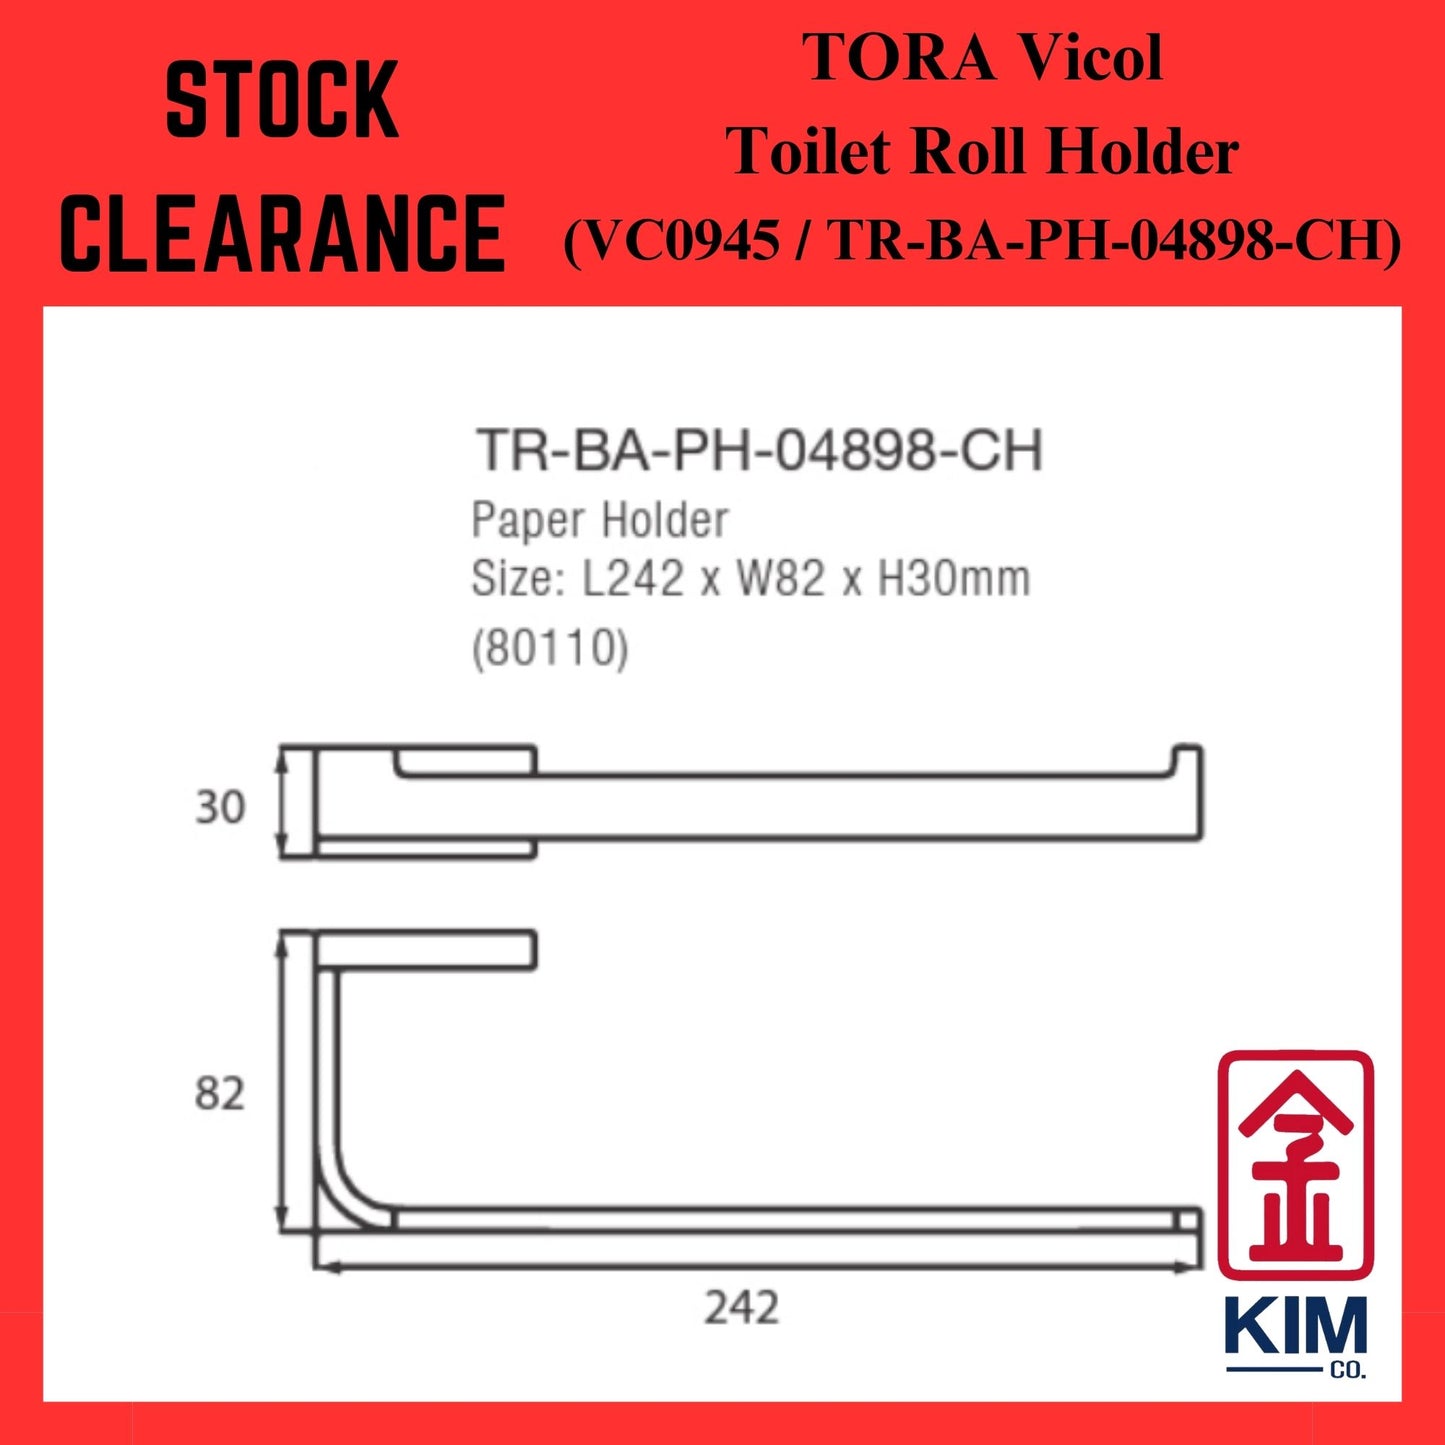 (Stock Clearance) Tora Vicol Brass Chrome Toilet Roll Holder Without Lid (VC0945 / TR-BA-PH-04898-CH)